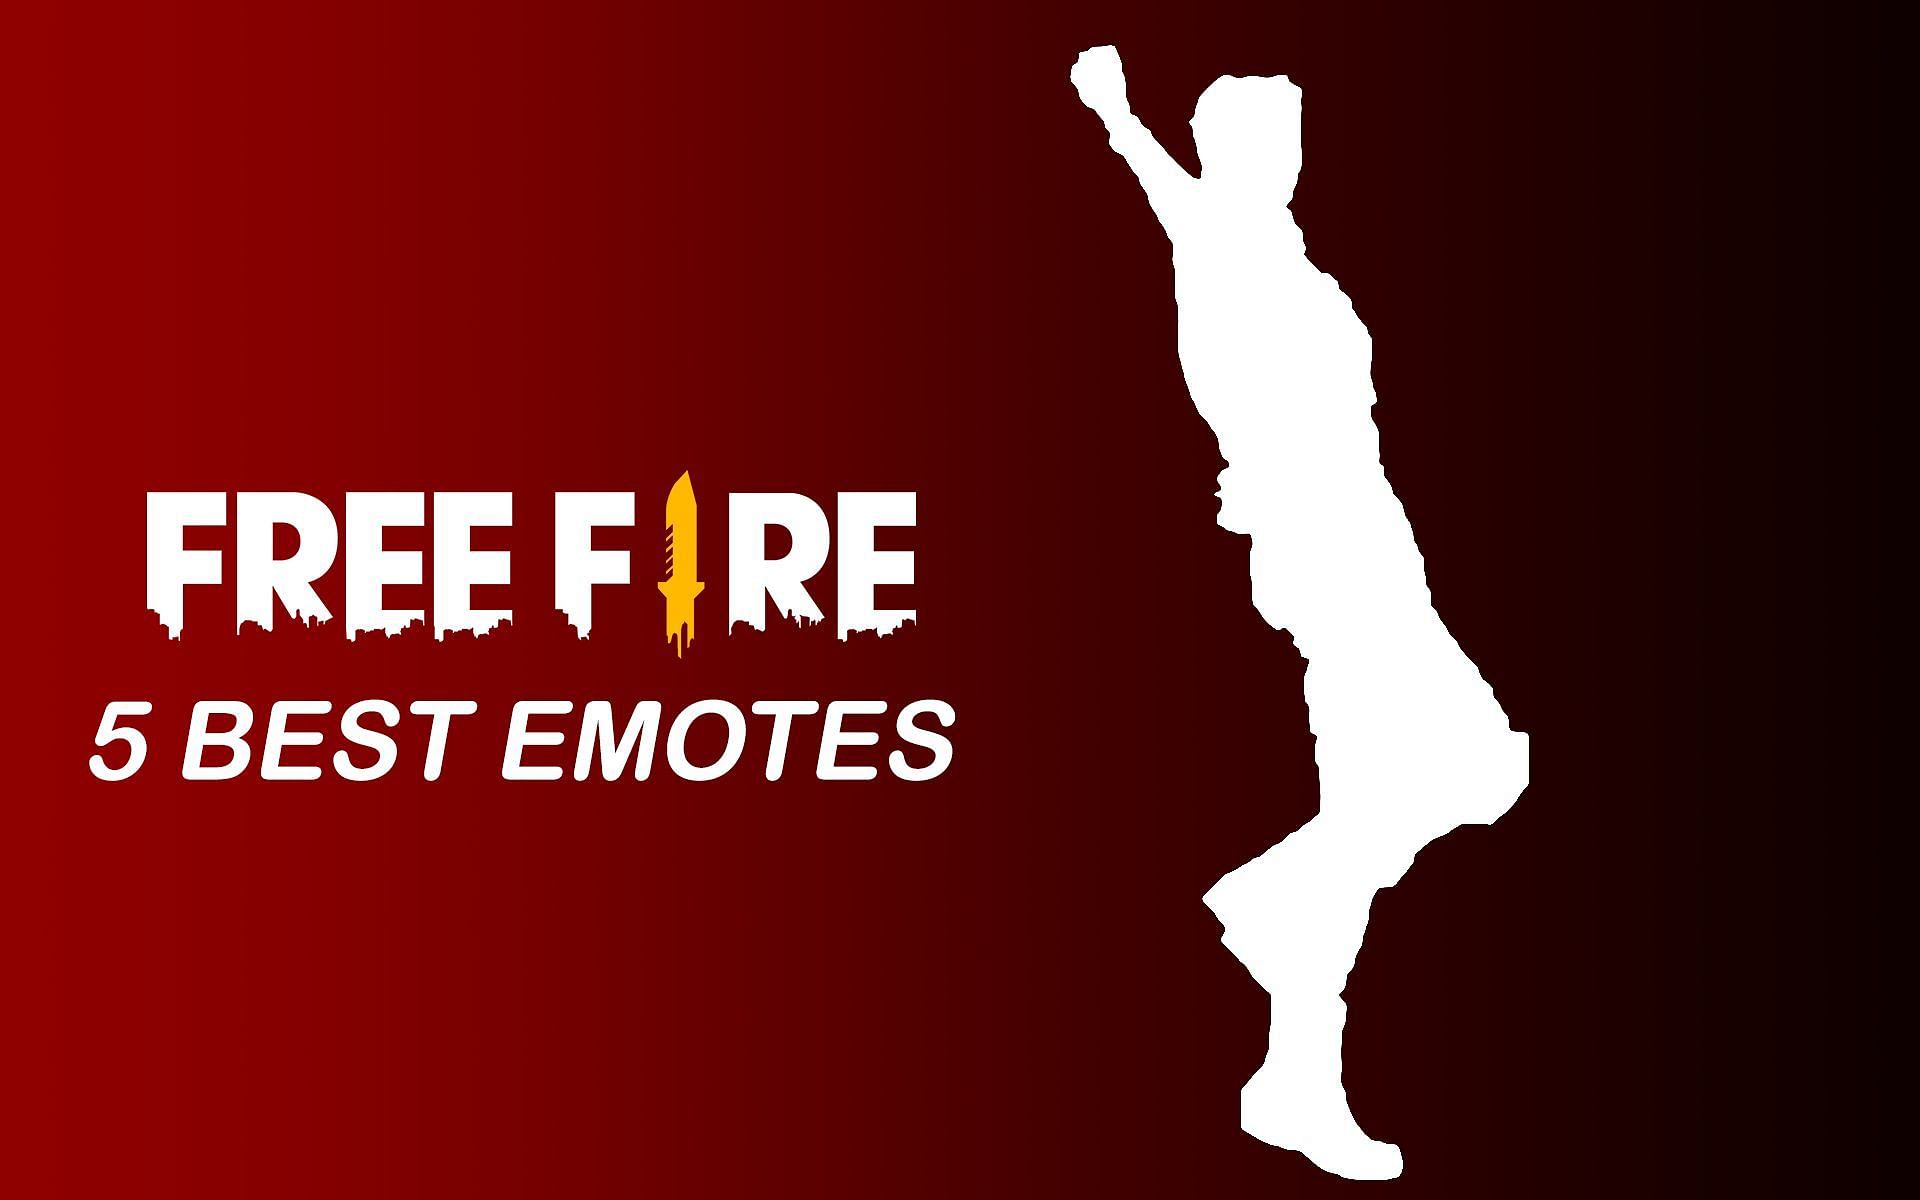 Gamers can have an eye on the Free Fire emotes mentioned below (Image via Sportskeeda)